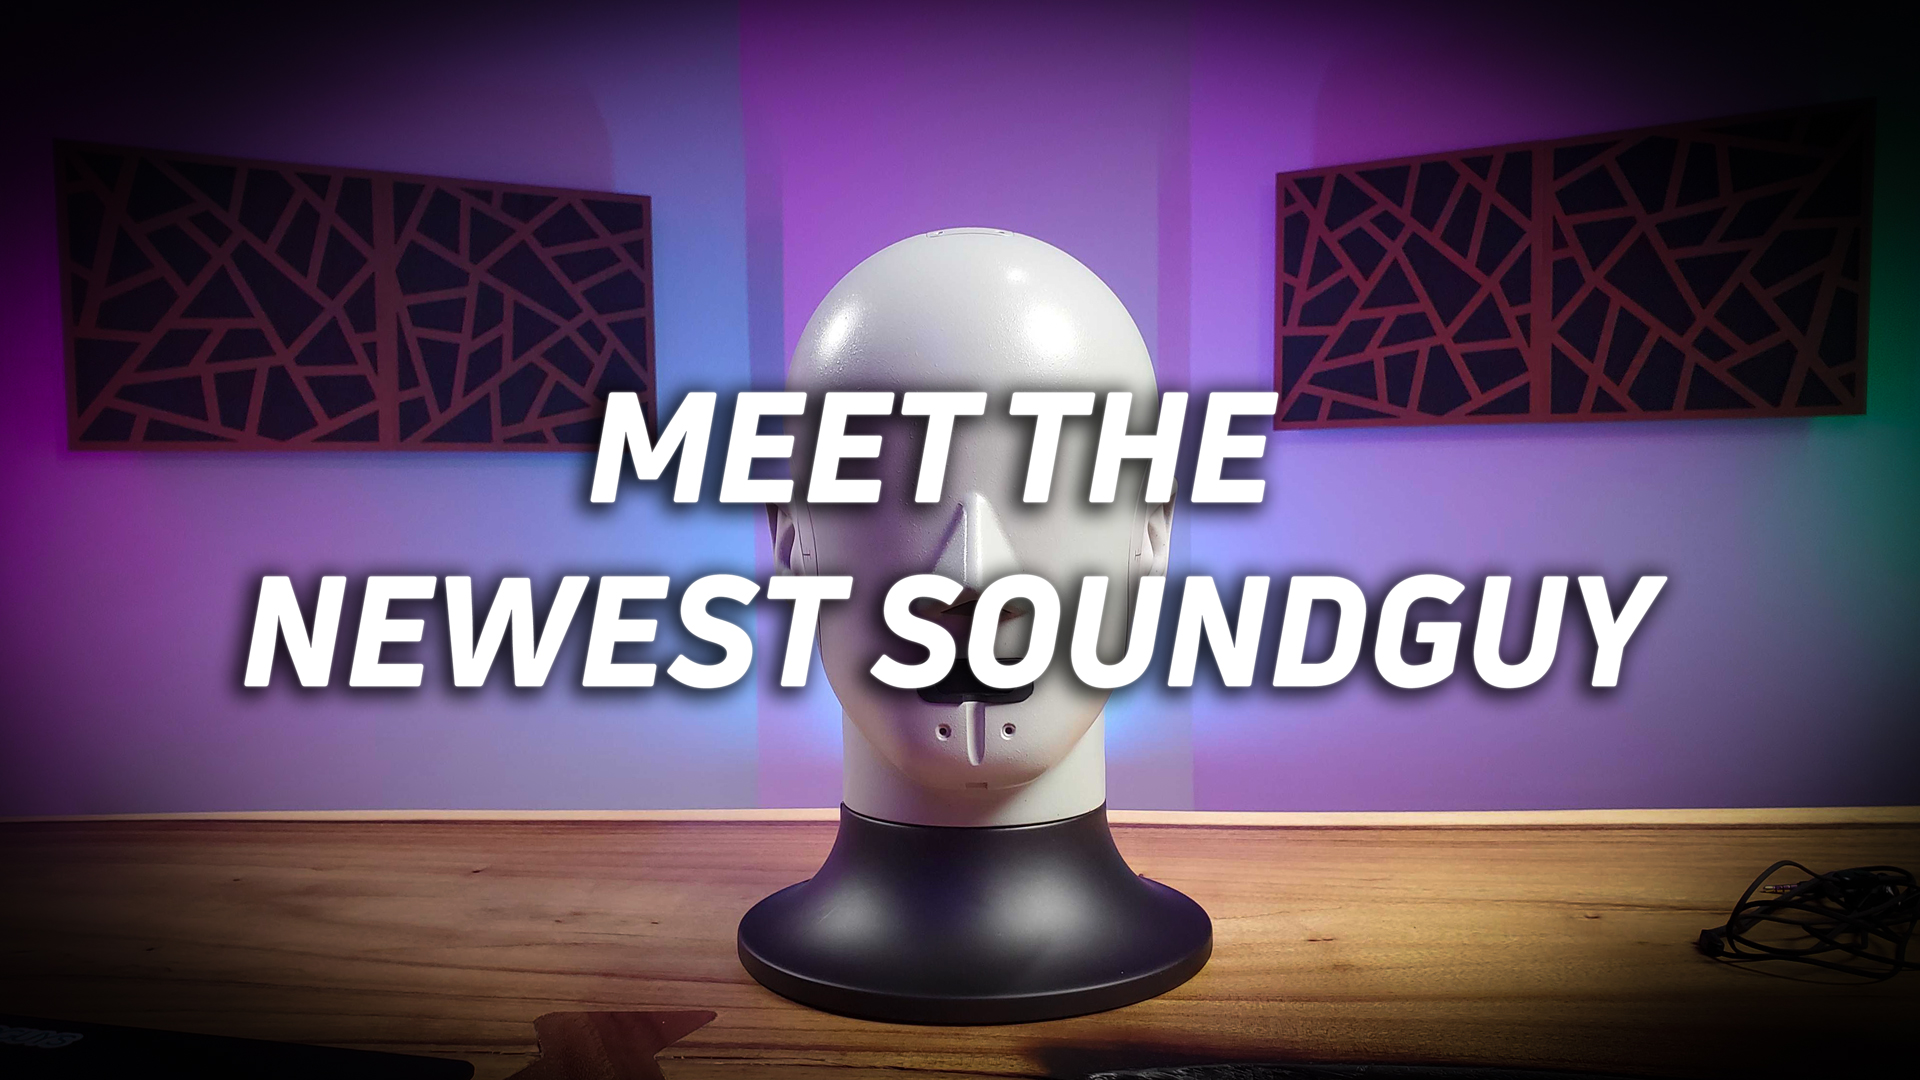 A photo of the Bruel & Kjaer 5128 on a table, with the text "meet the newest soundguy" overlaid onto the image.